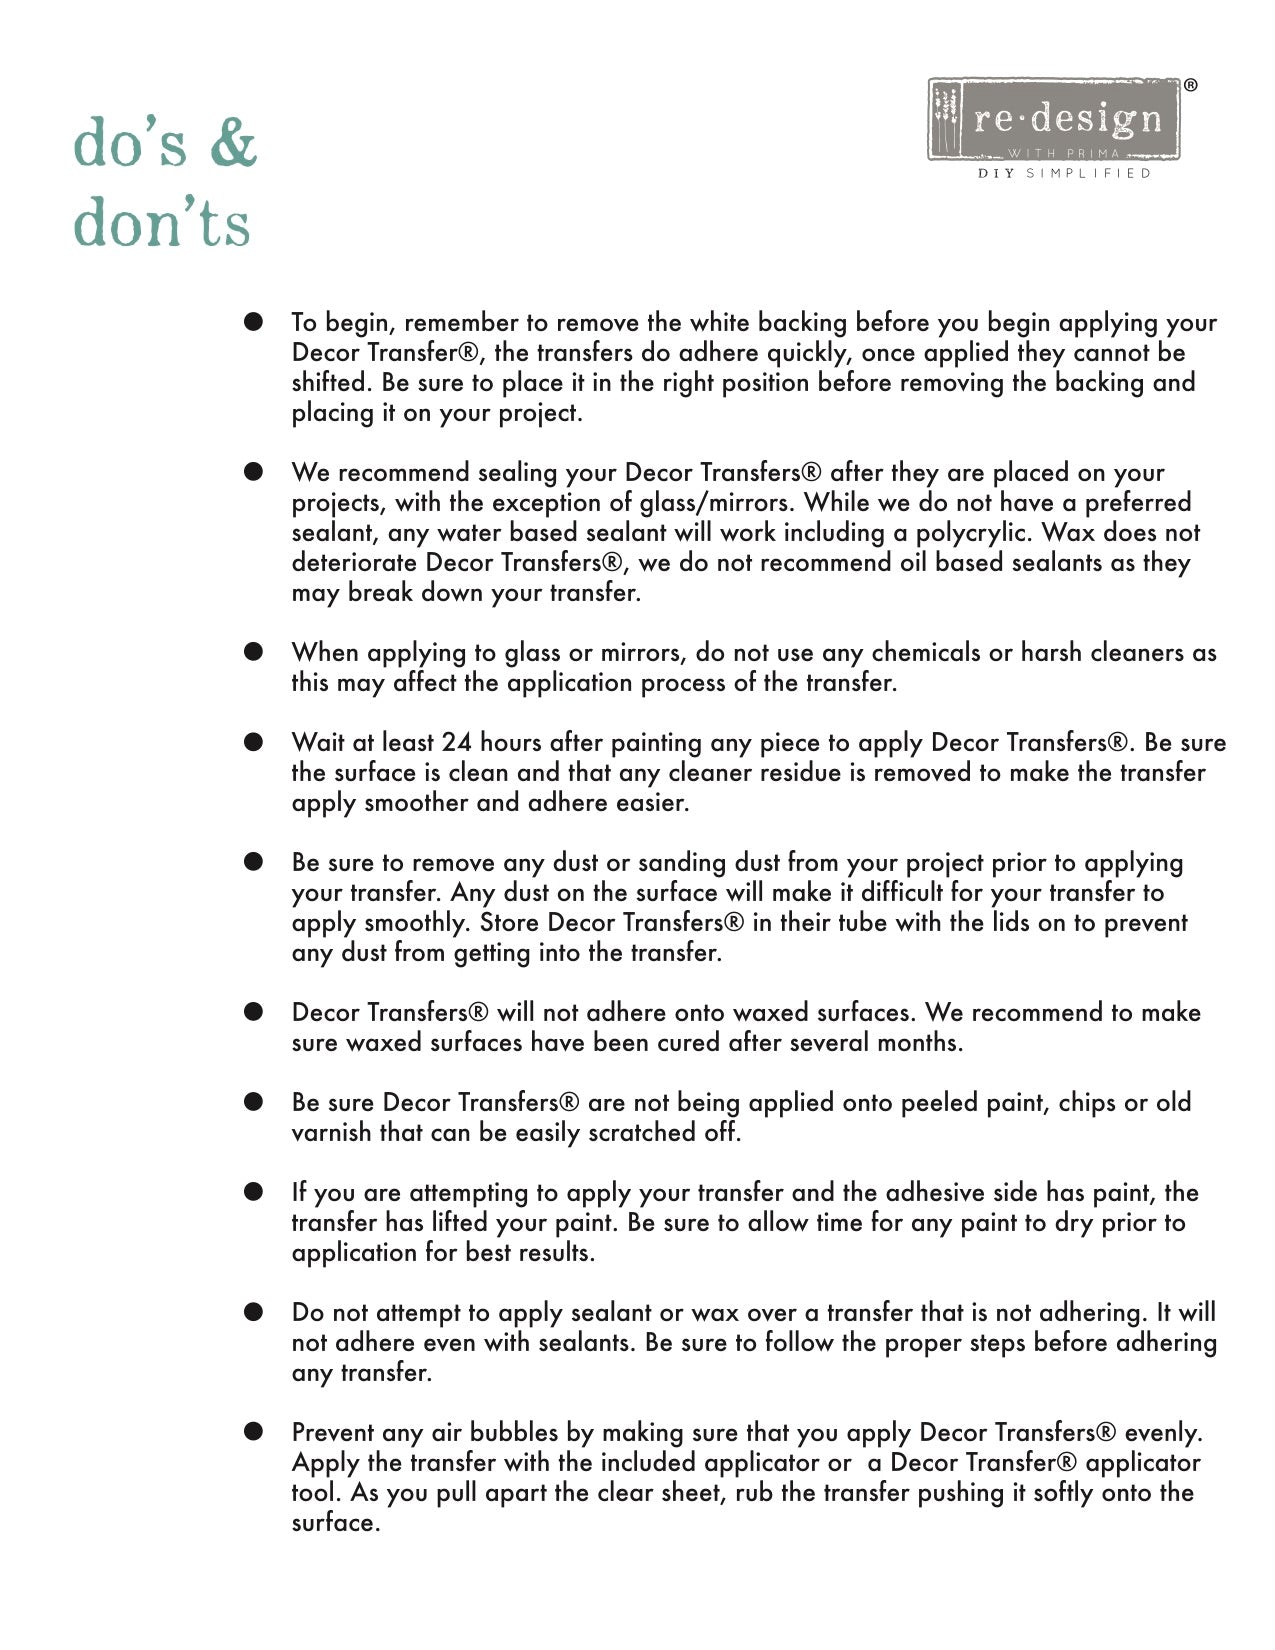 Redesign Transfer Do's and Dont's Page 1